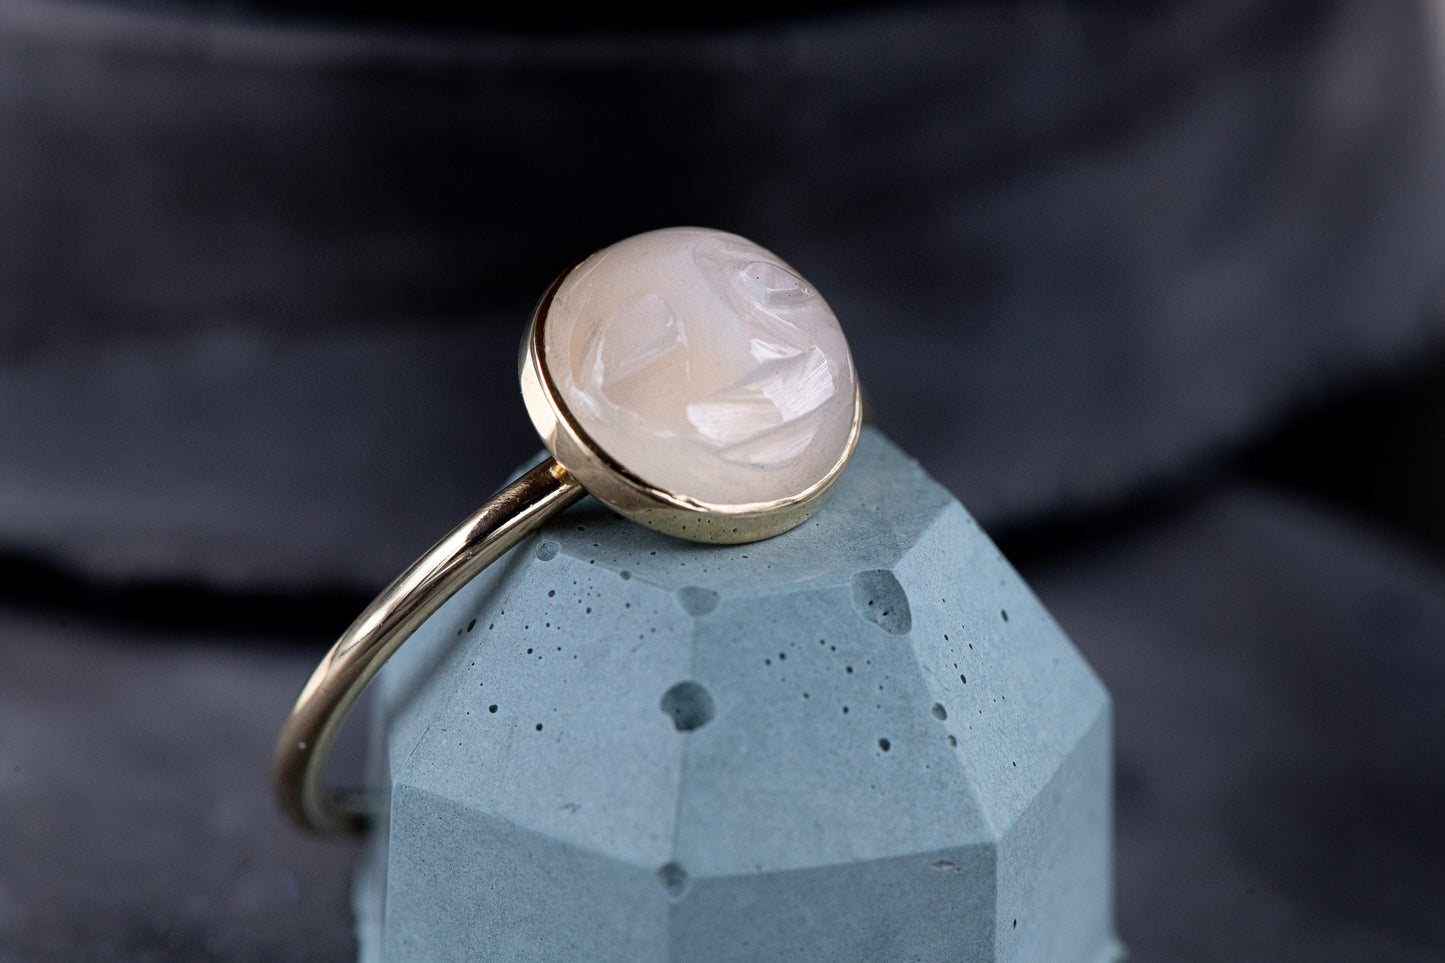 A handmade White Moonstone Face Ring in Recycled 14k Yellow Gold, crafted by Cassin Jewelry.